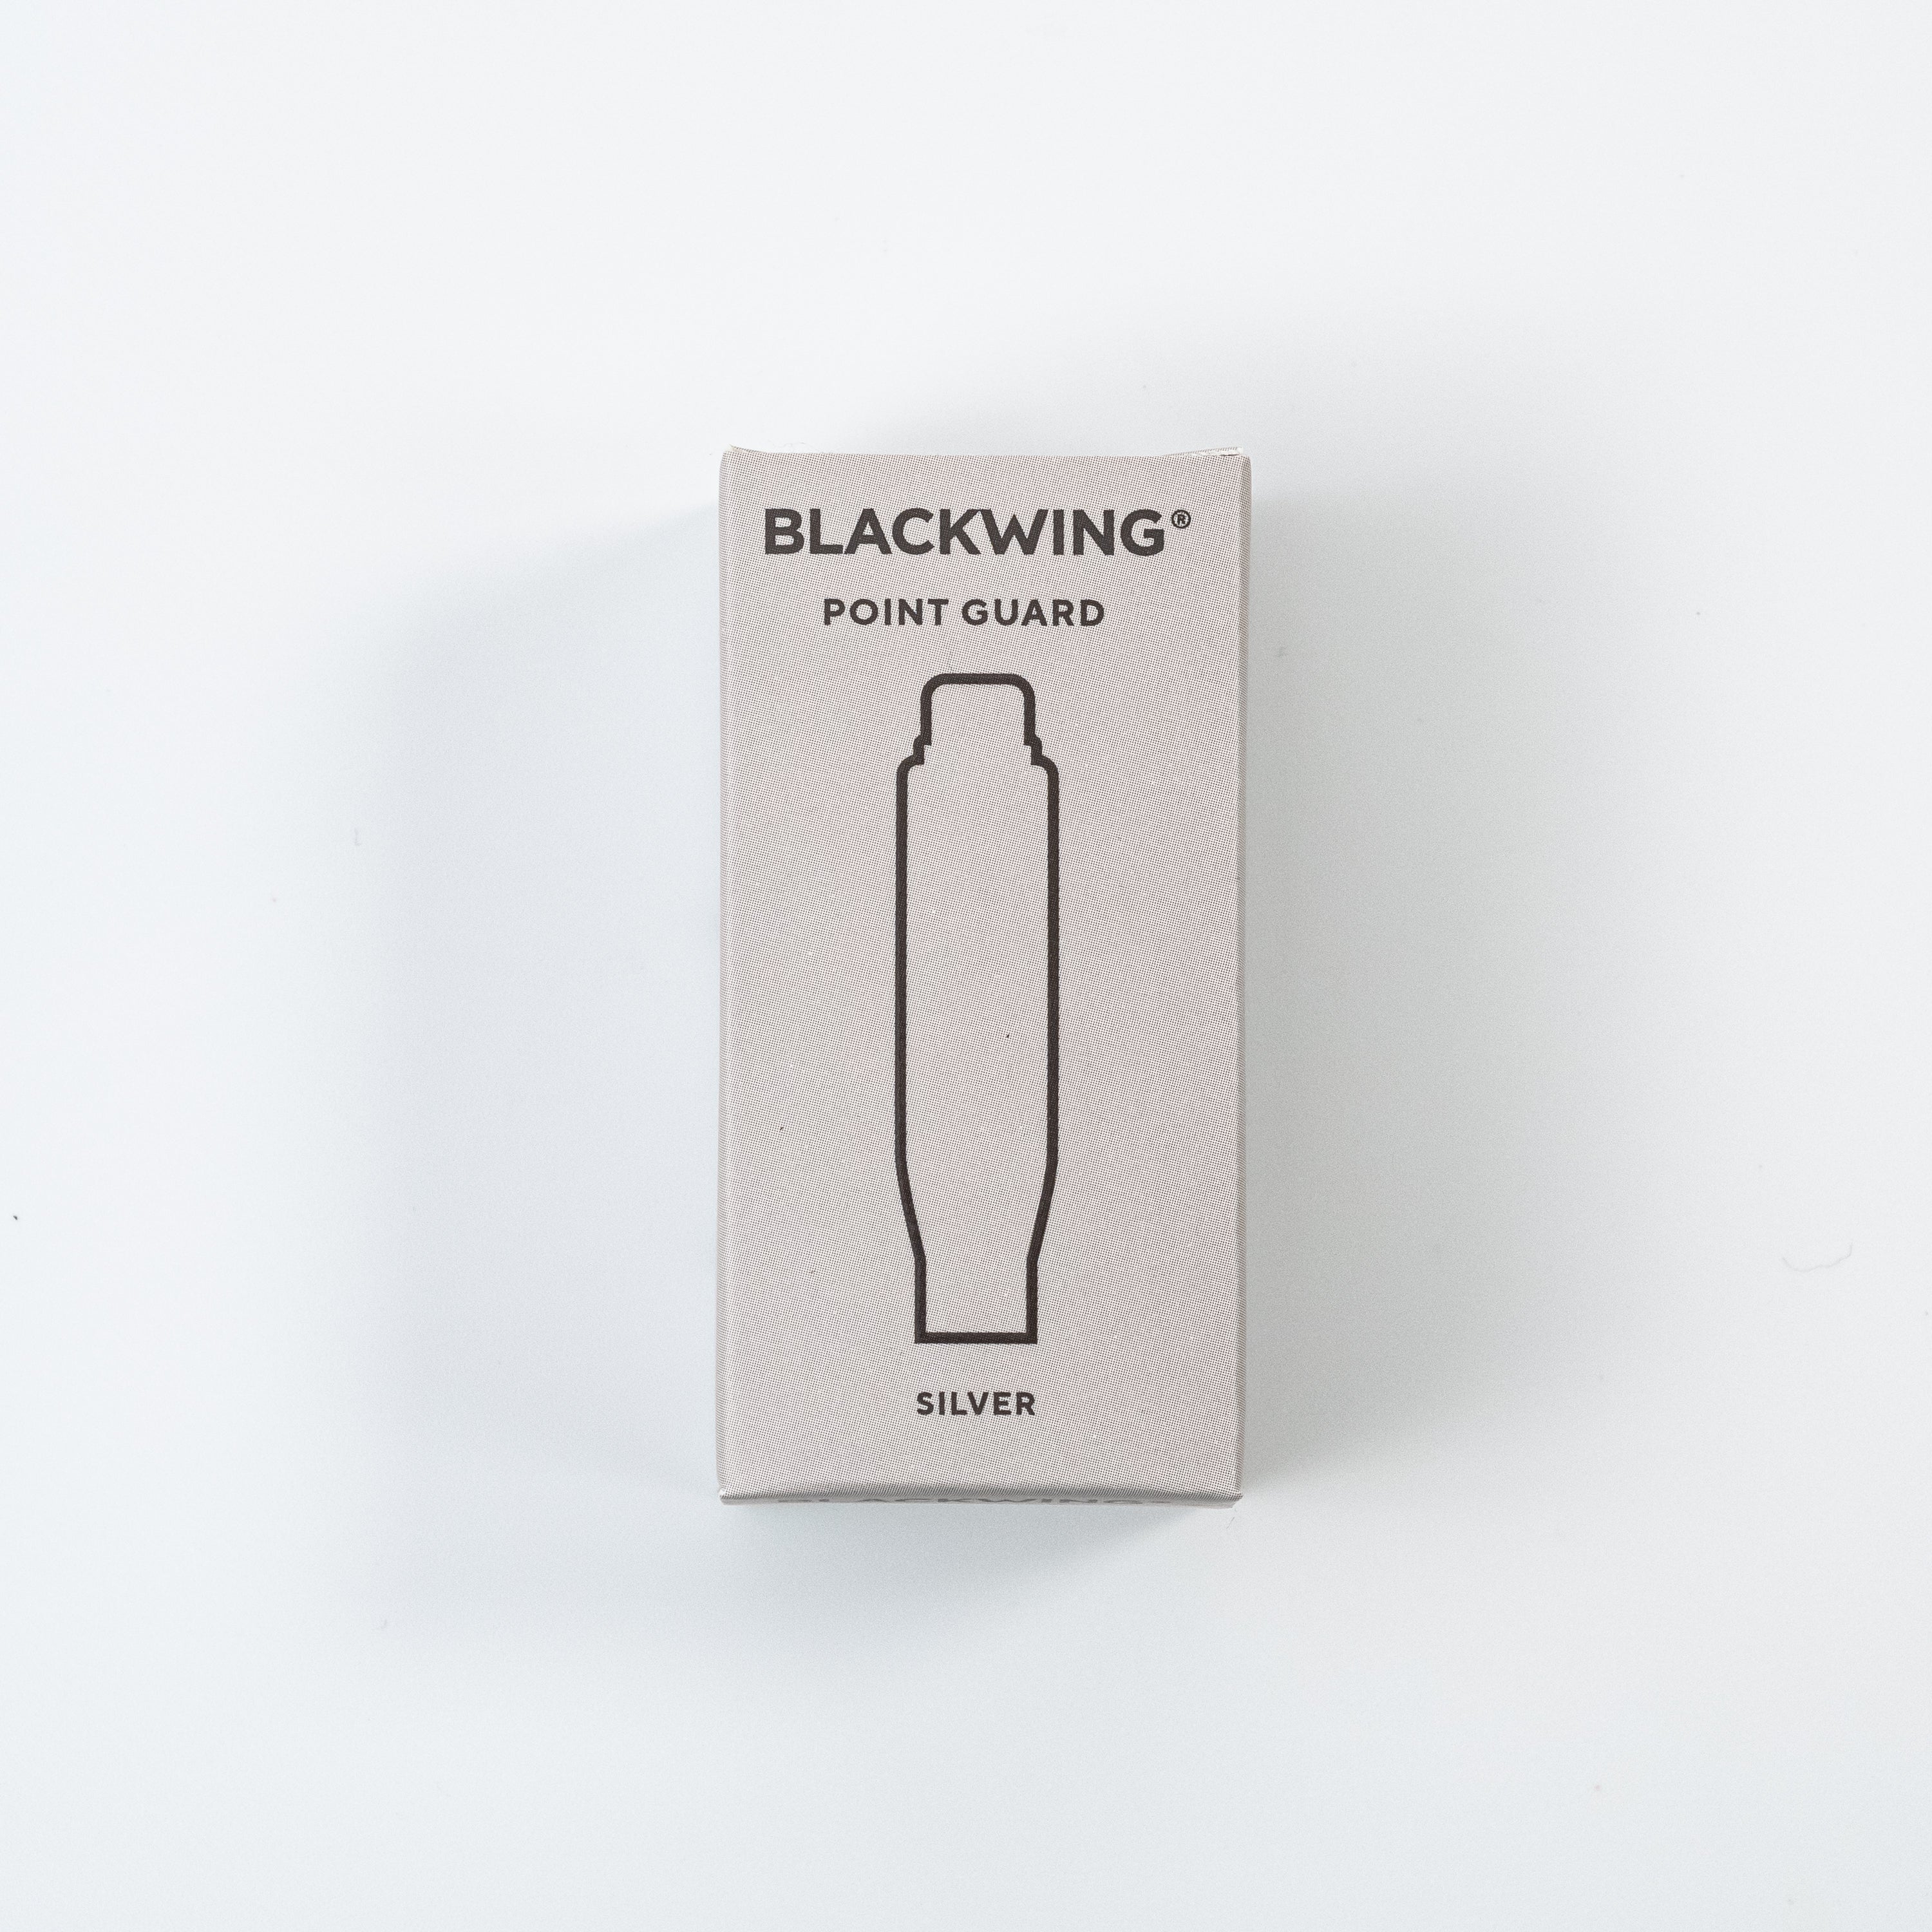 A box with a Blackwing Point Guard - Silver logo, made of lightweight machined aluminum.